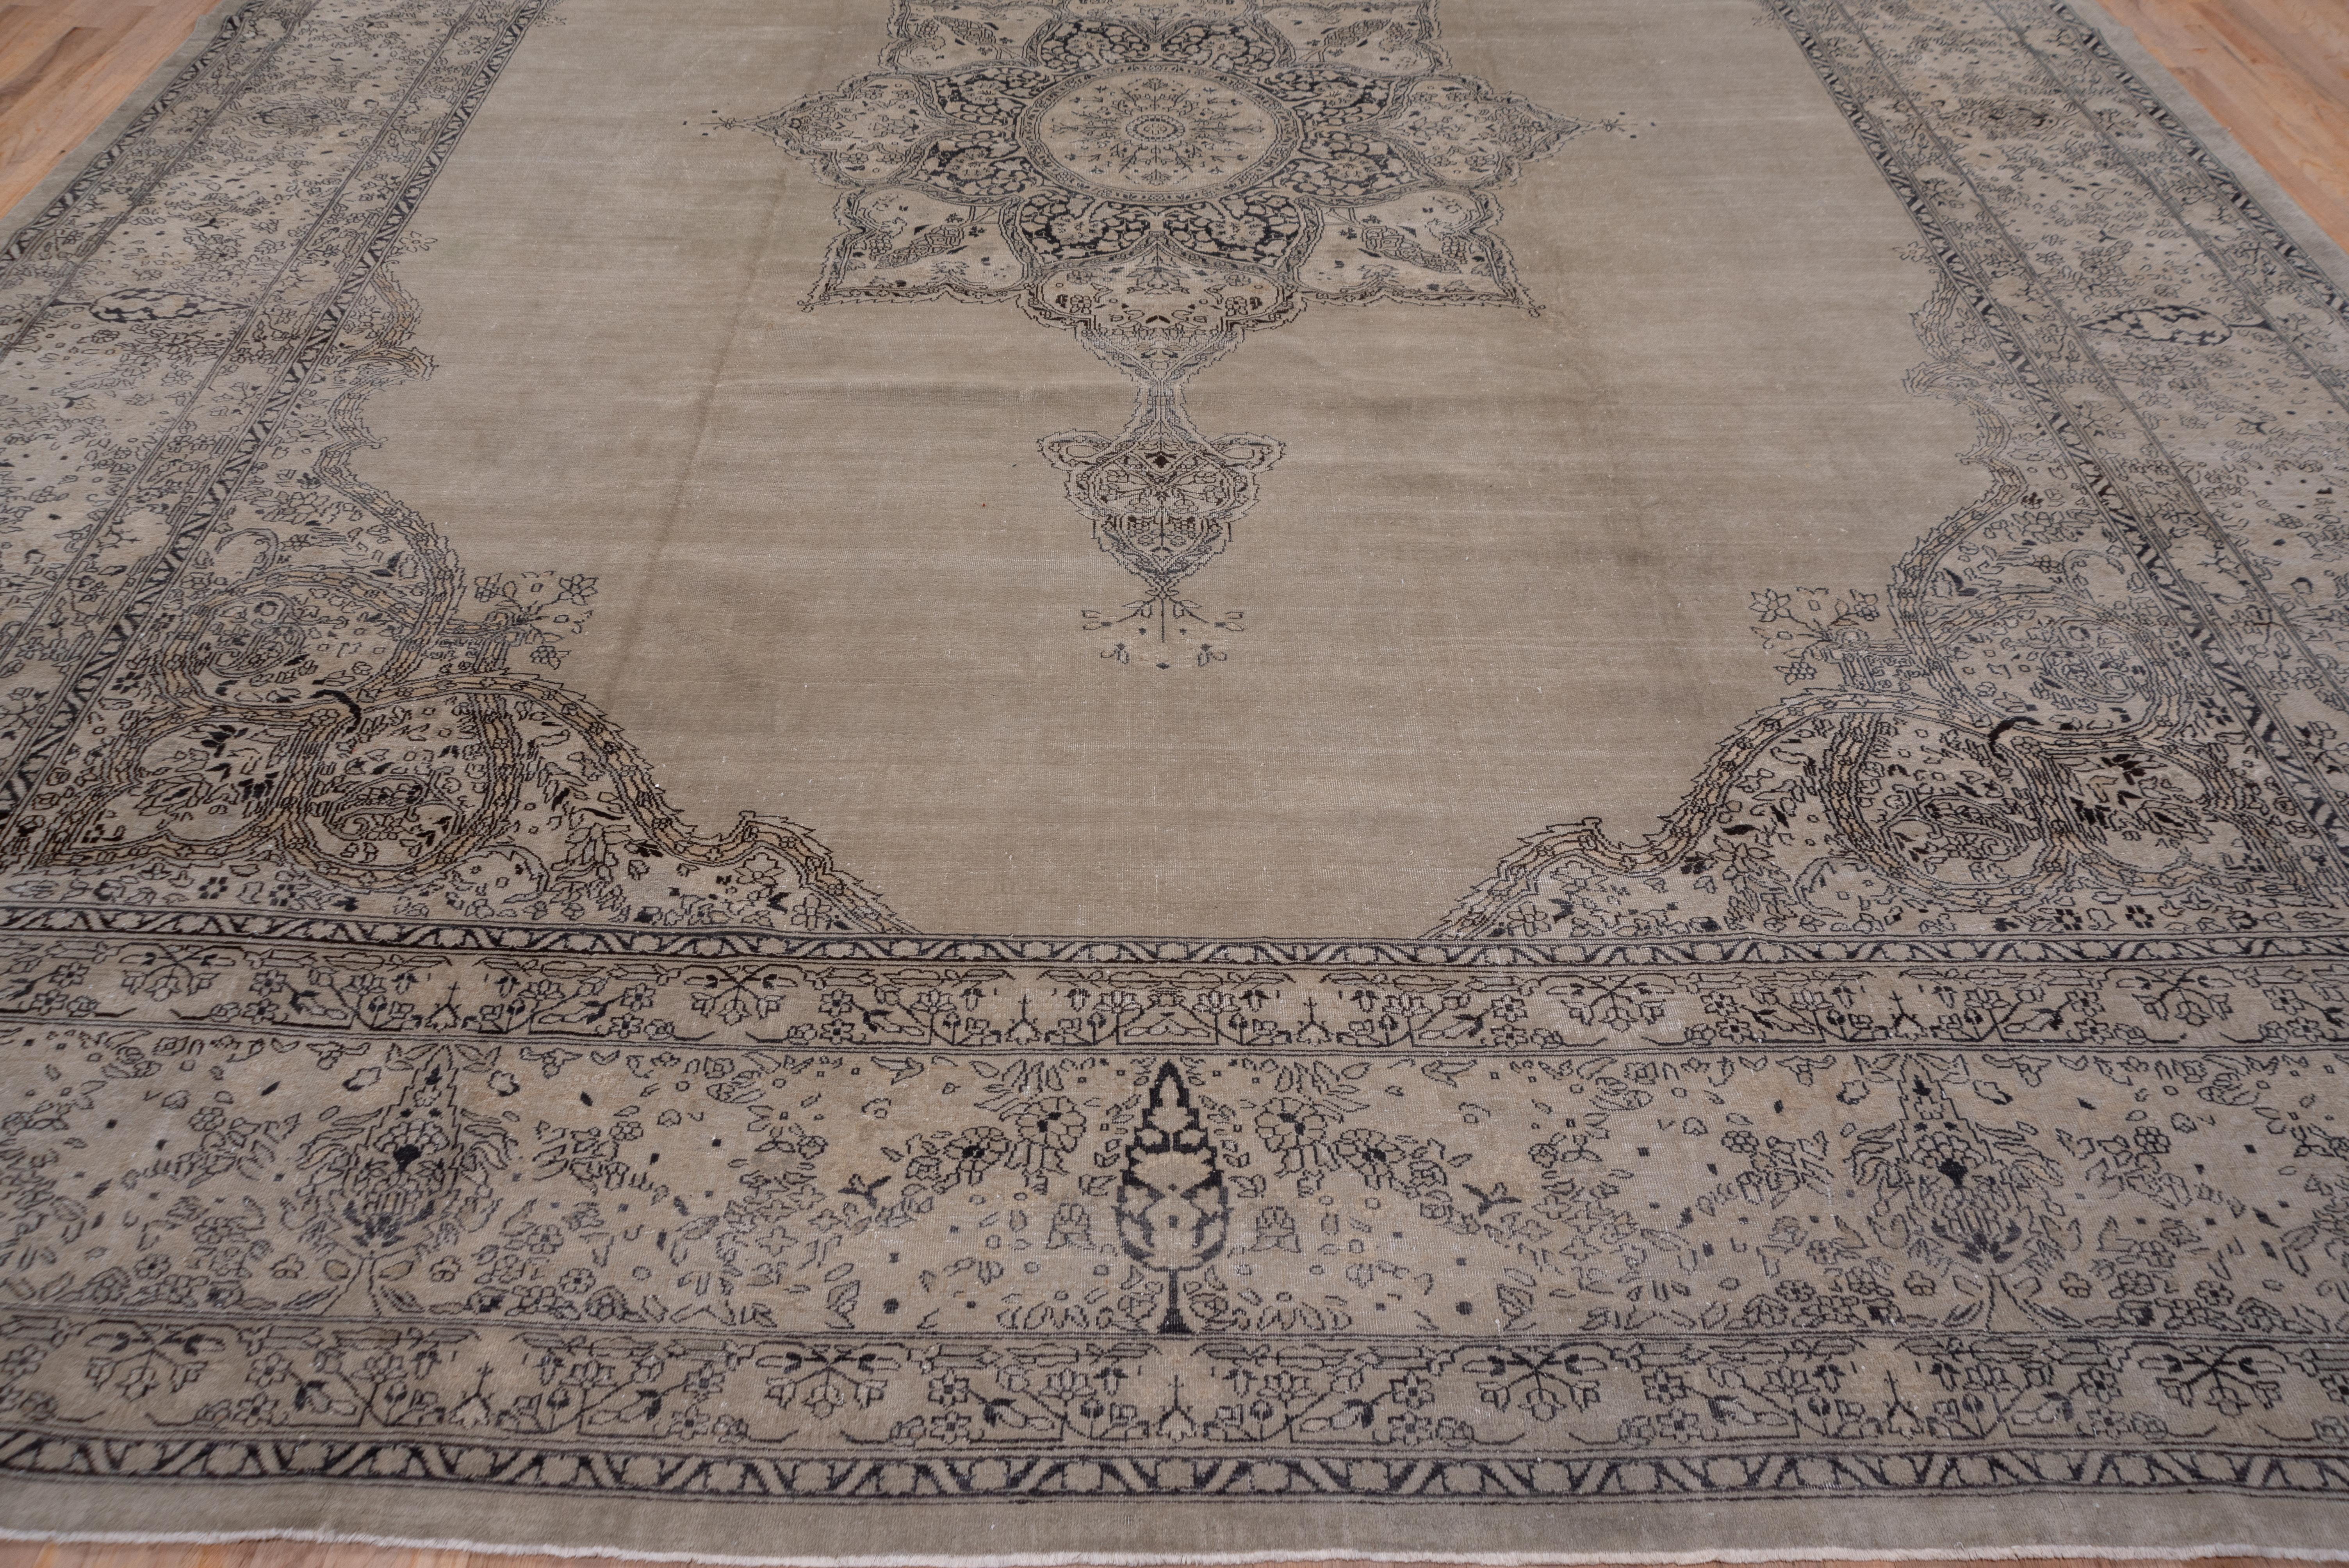 In the Persian Kerman manner with a large pendant octogramed medallion and circular sub-medallion on the open beige field with split arabesque scrolling corners. The Kerman theme continues in the main border with its cypress tree and flower spray